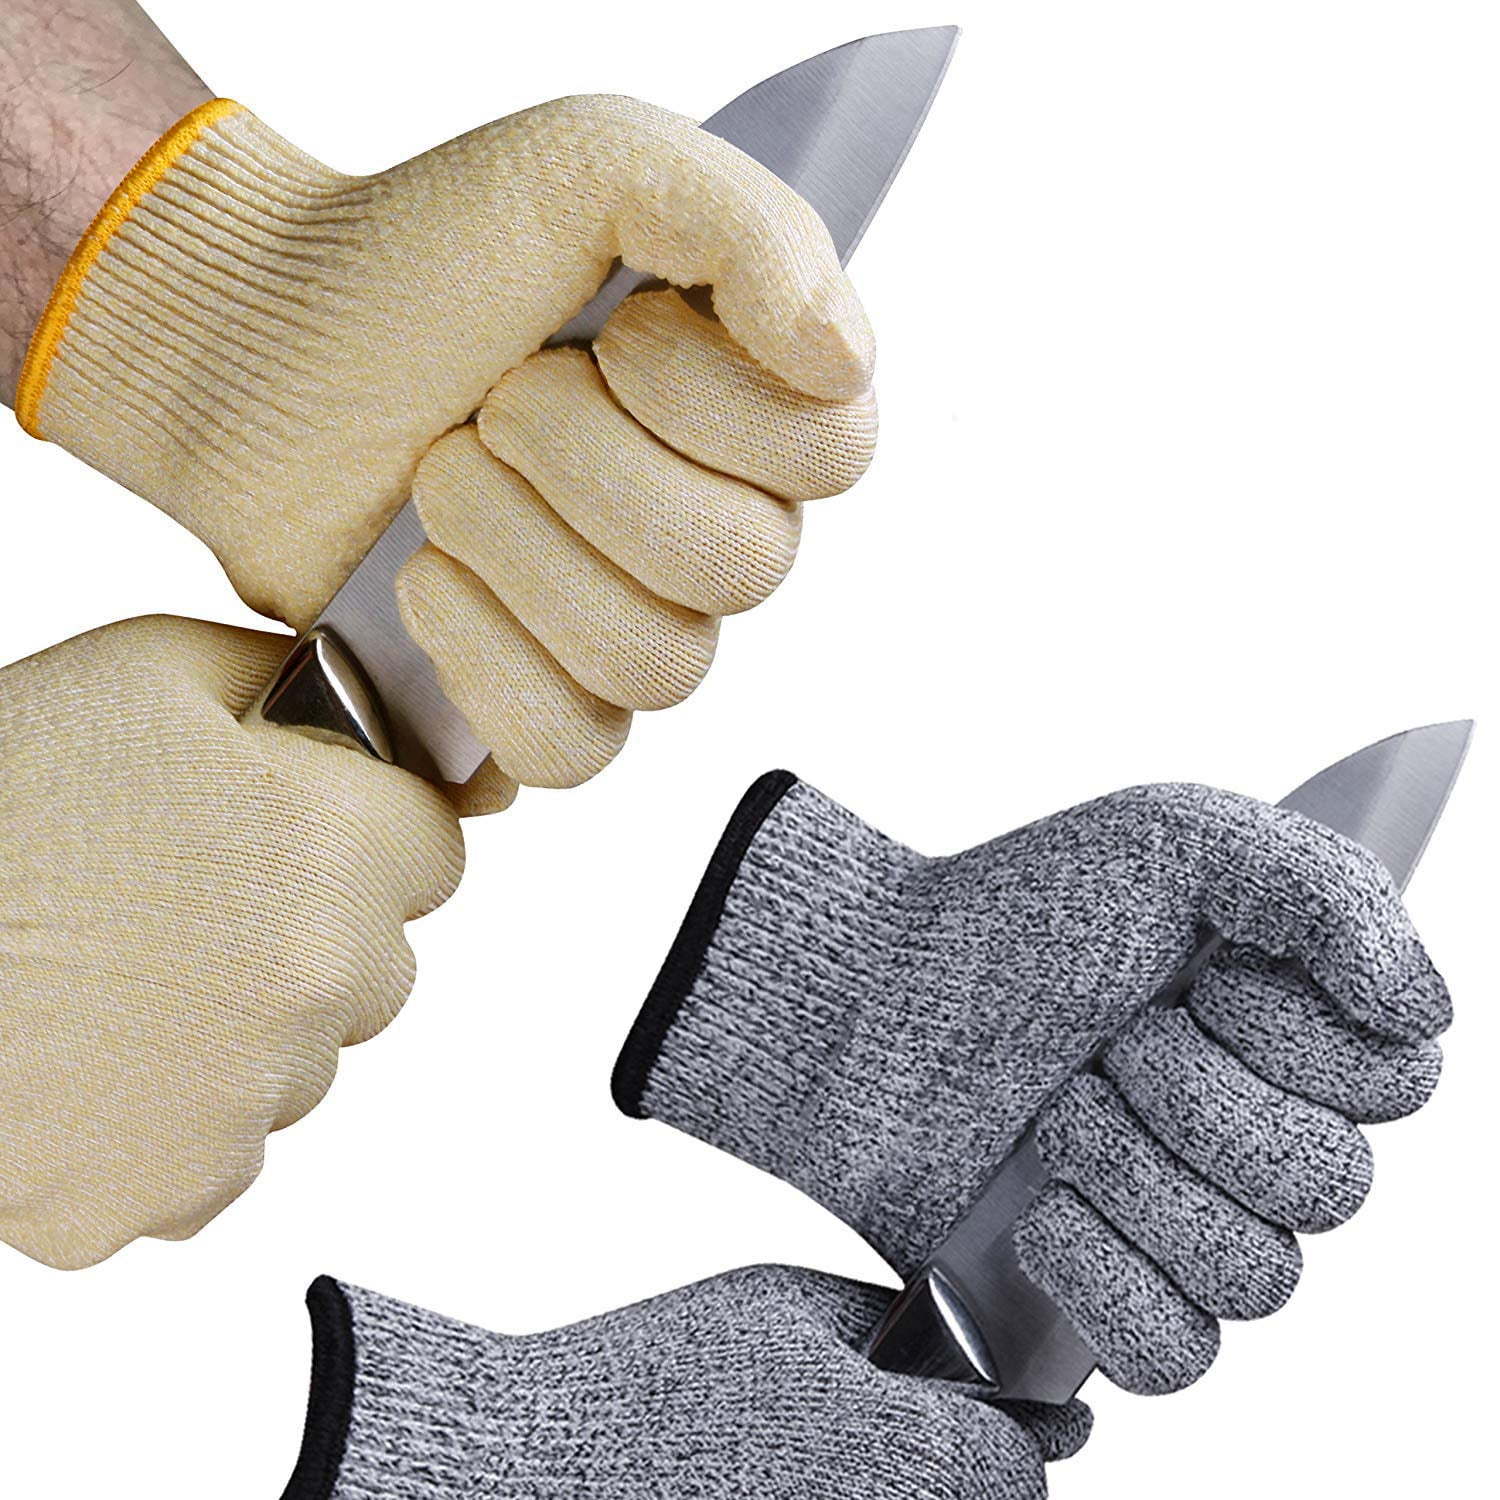 2 Pairs Evridwear Cut Resistant Gloves With Silicone Grip Dots, Food Grade  Level 5 Safety Protection Kitchen Working Kevlar Gloves For Cutting,  Slicing and Garden works (Yellow + Gray) Medium 